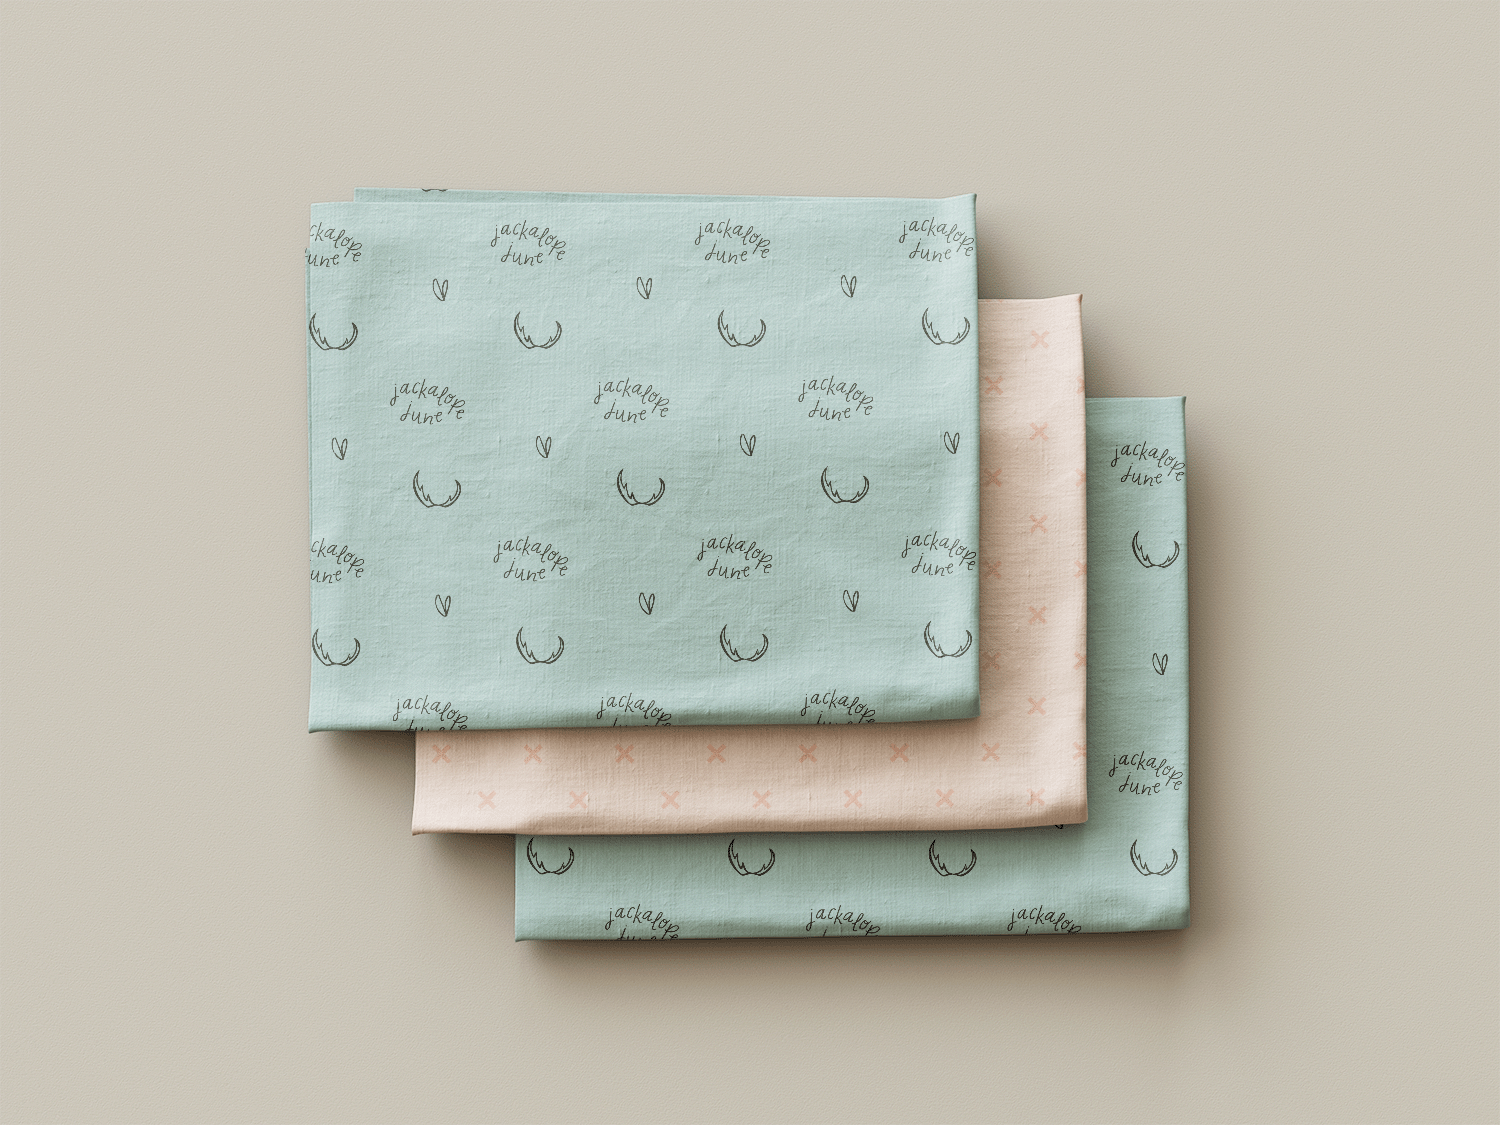 A digital mockup of the jackalope june fabric swatches designed by Aprille.